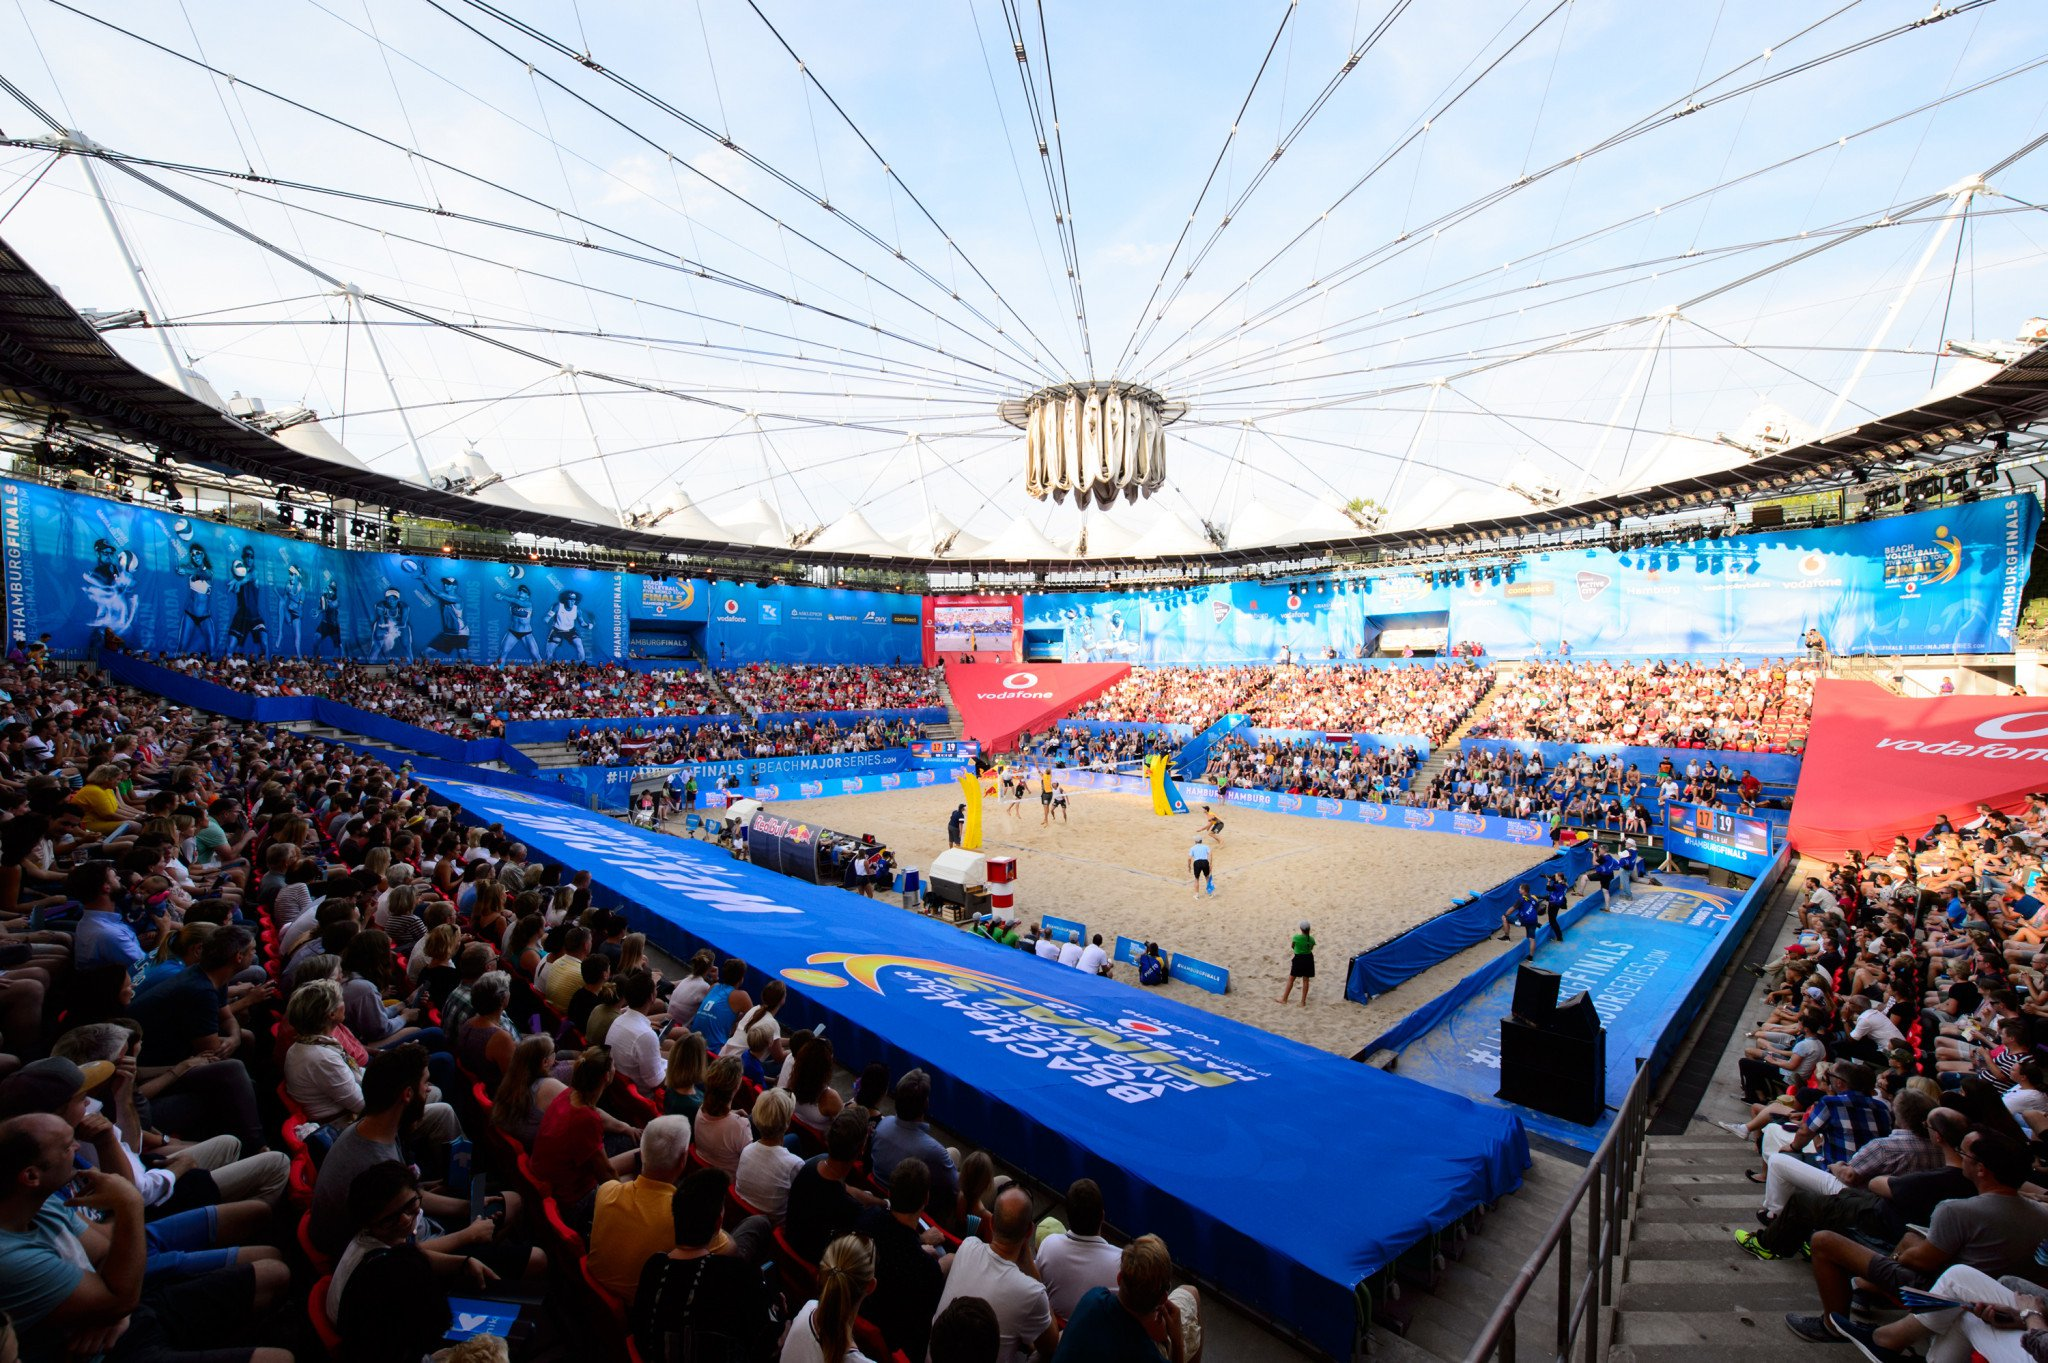 The pool stage of competition began at the Beach Volleyball World Championships ©FIVB